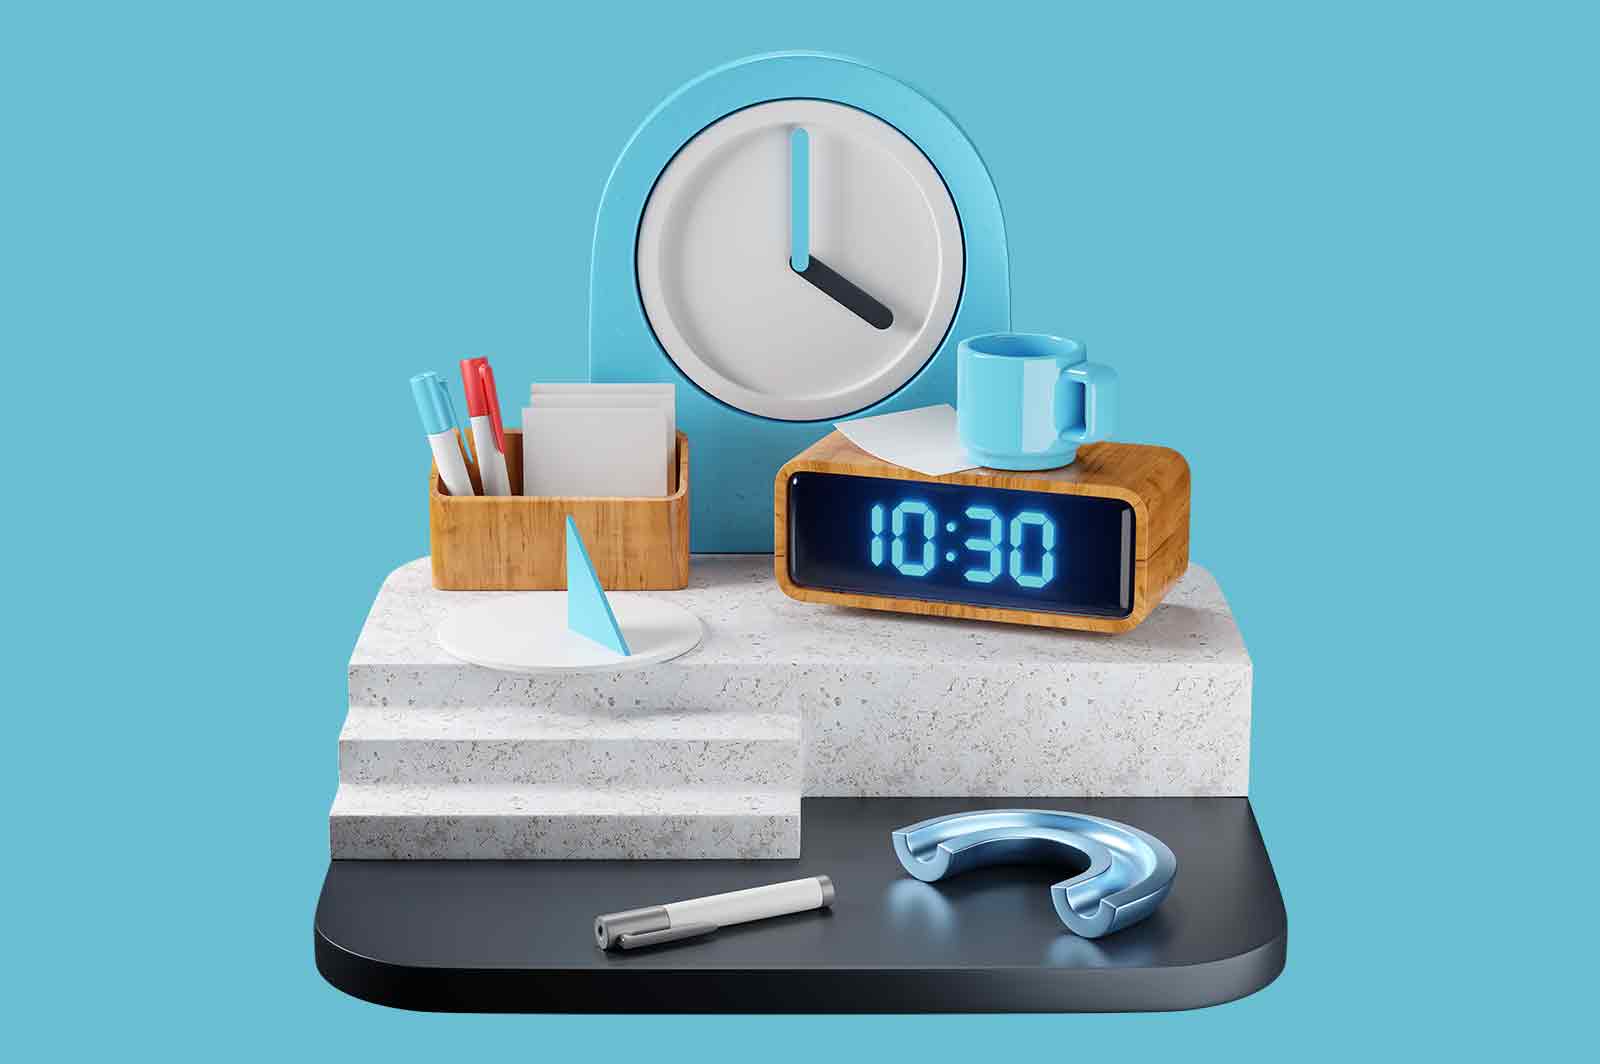 Abstract composition of office details on black stand 3d rendered illustration. Clocks and office supplies on ceramic stand with stairs. Components of single mechanism concept